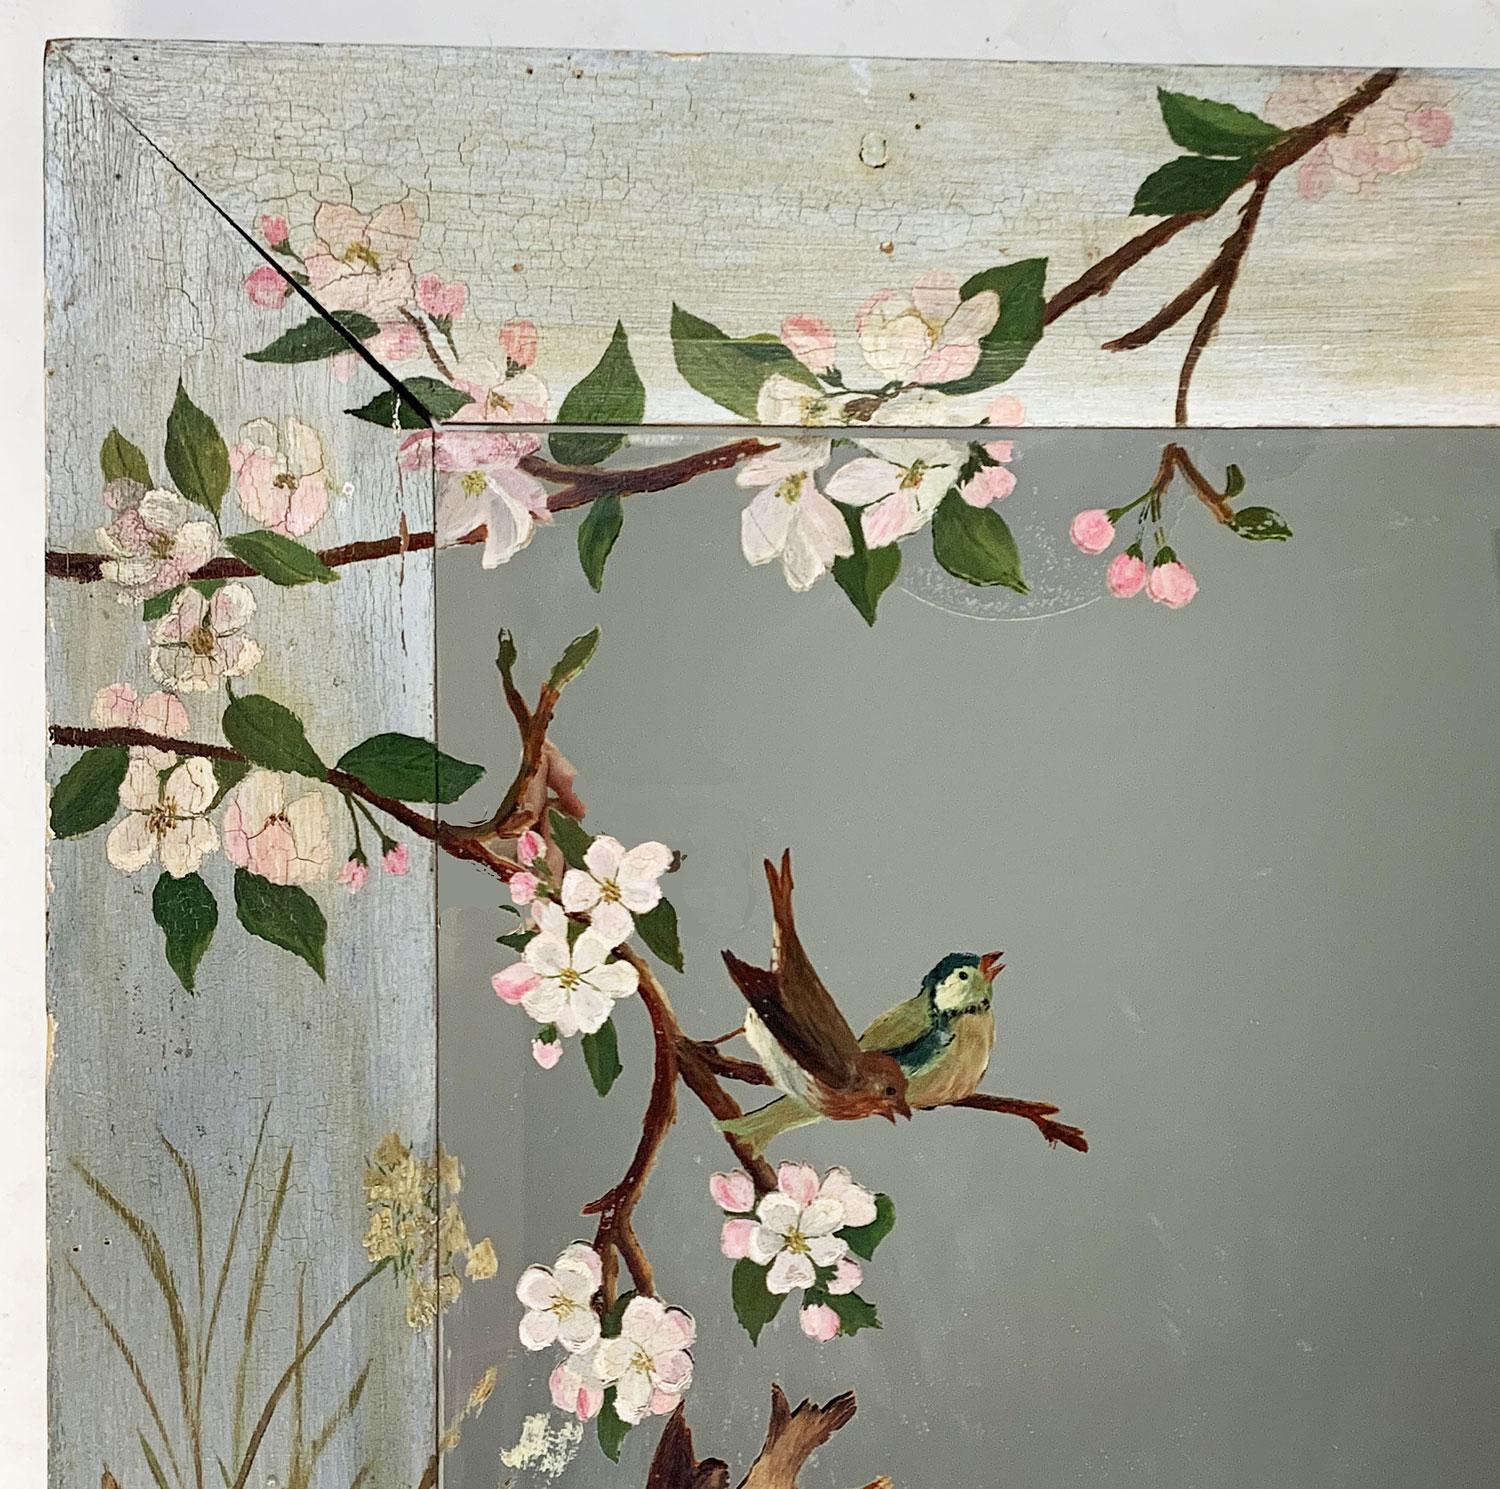 Adirondack Decorated Cottage Mirror Beveled Glass Painted w/Birds and Blossoms, circa 1890